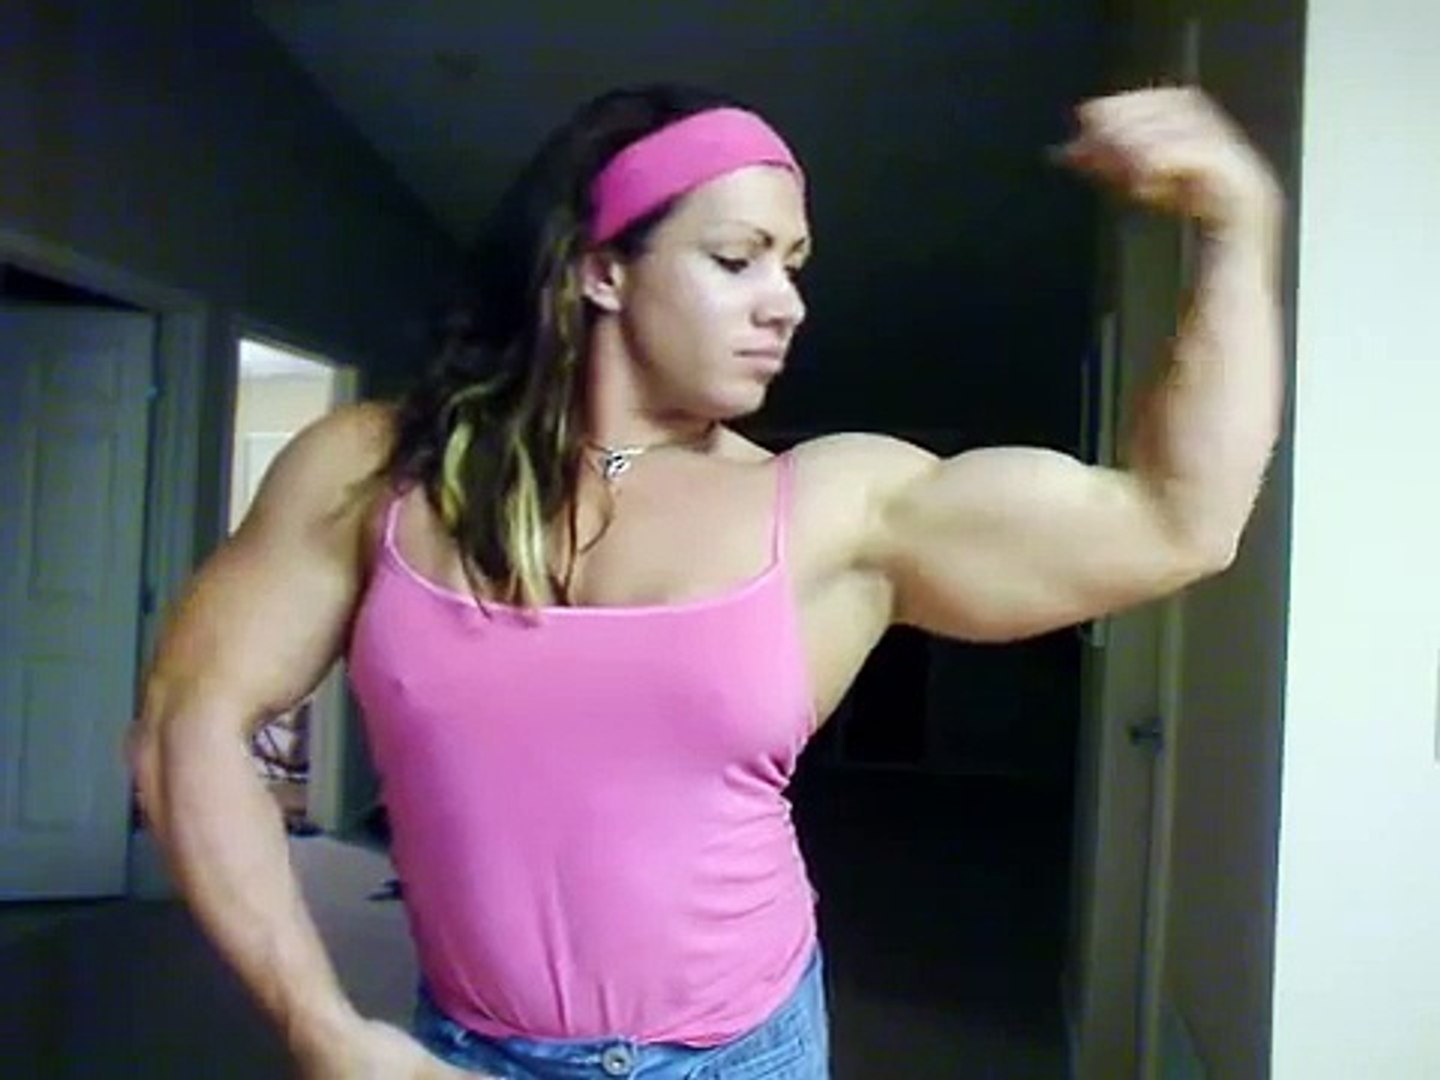 world fitness Big Strong Muscle Woman flexing her biceps in webcam - video  Dailymotion